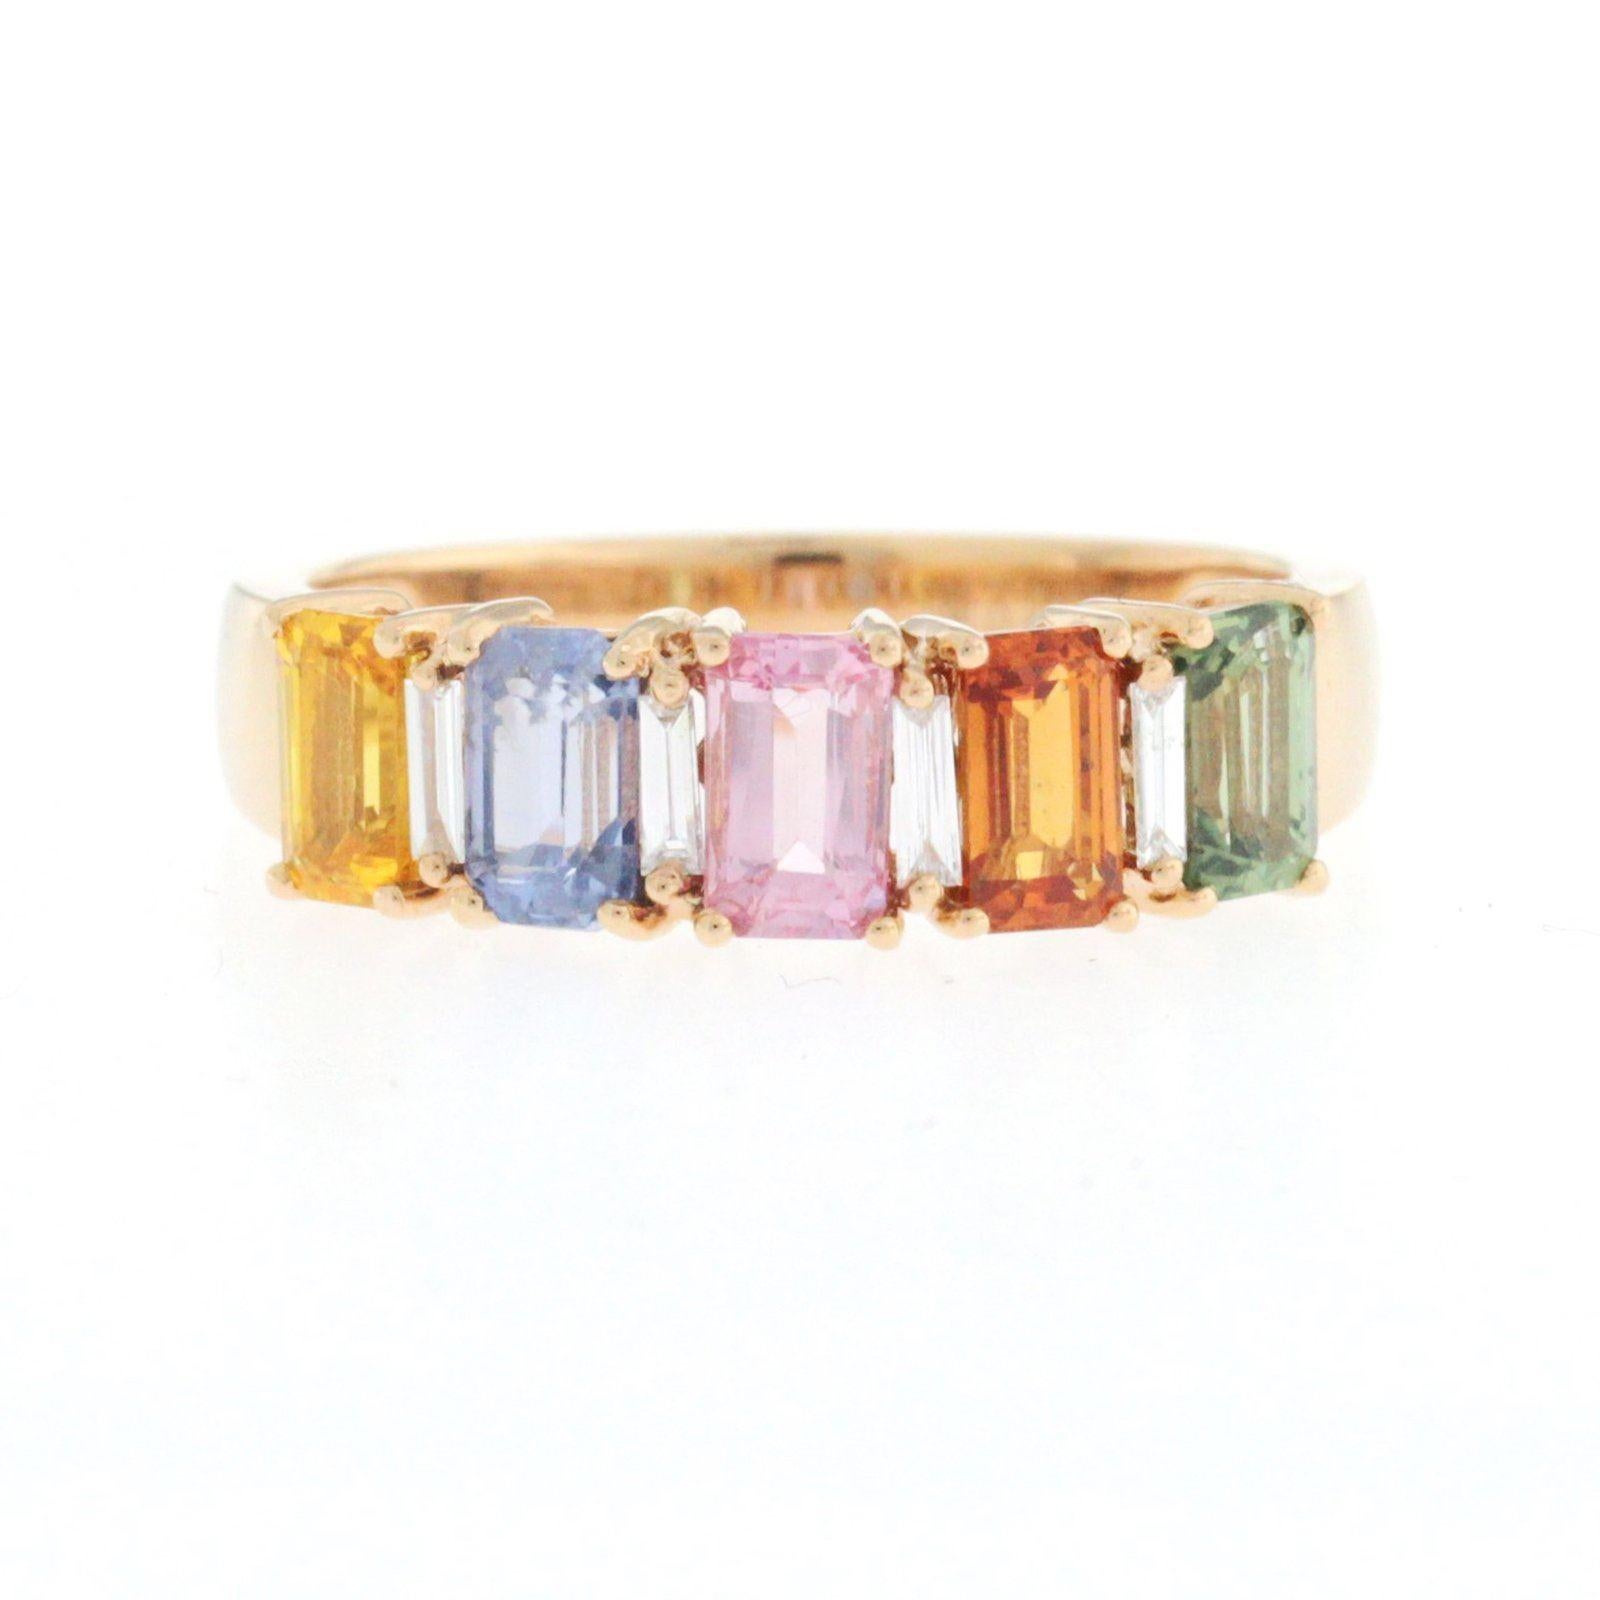 Top: 5.5 mm
Band Width: 2.8 mm
Metal: 18K Rose Gold 
Size: 6-8 ( Please message Us for your Size )
Hallmarks: 750
Total Weight: 3.2 Grams
Stone Type: 0.06 Natural MultiColor Sapphires & 0.13 CT Diamonds
Condition: New
Estimated Retail Price: